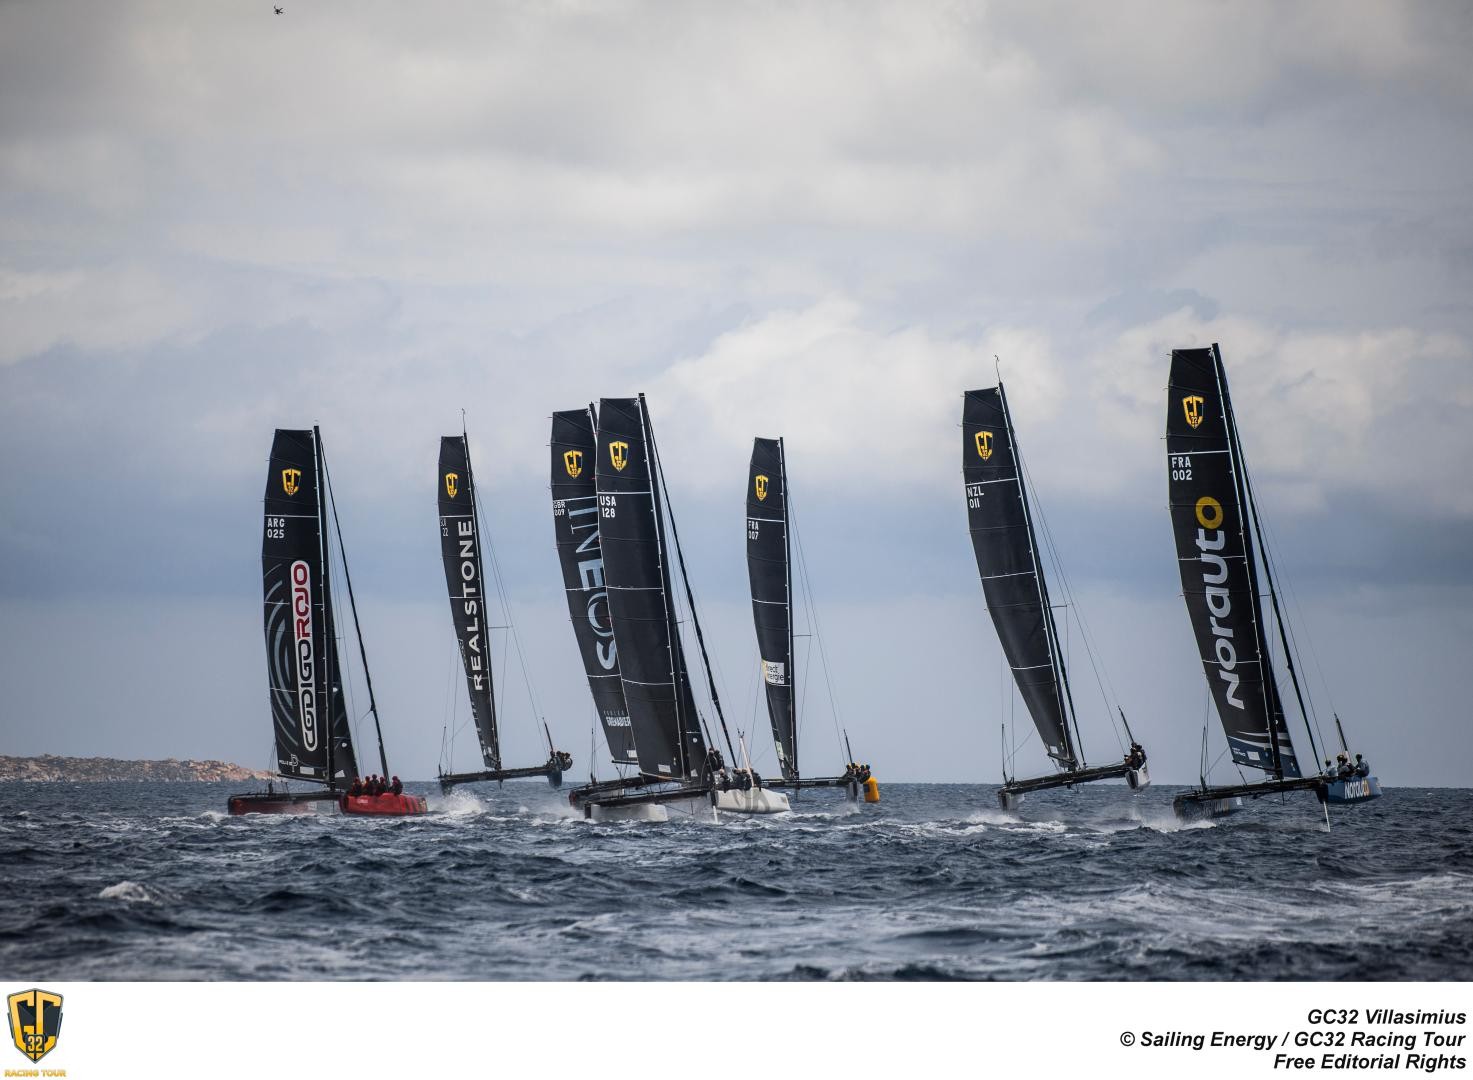 Full fleet reaching starts are the high adrenalin moments at the GC32 Racing Tour.